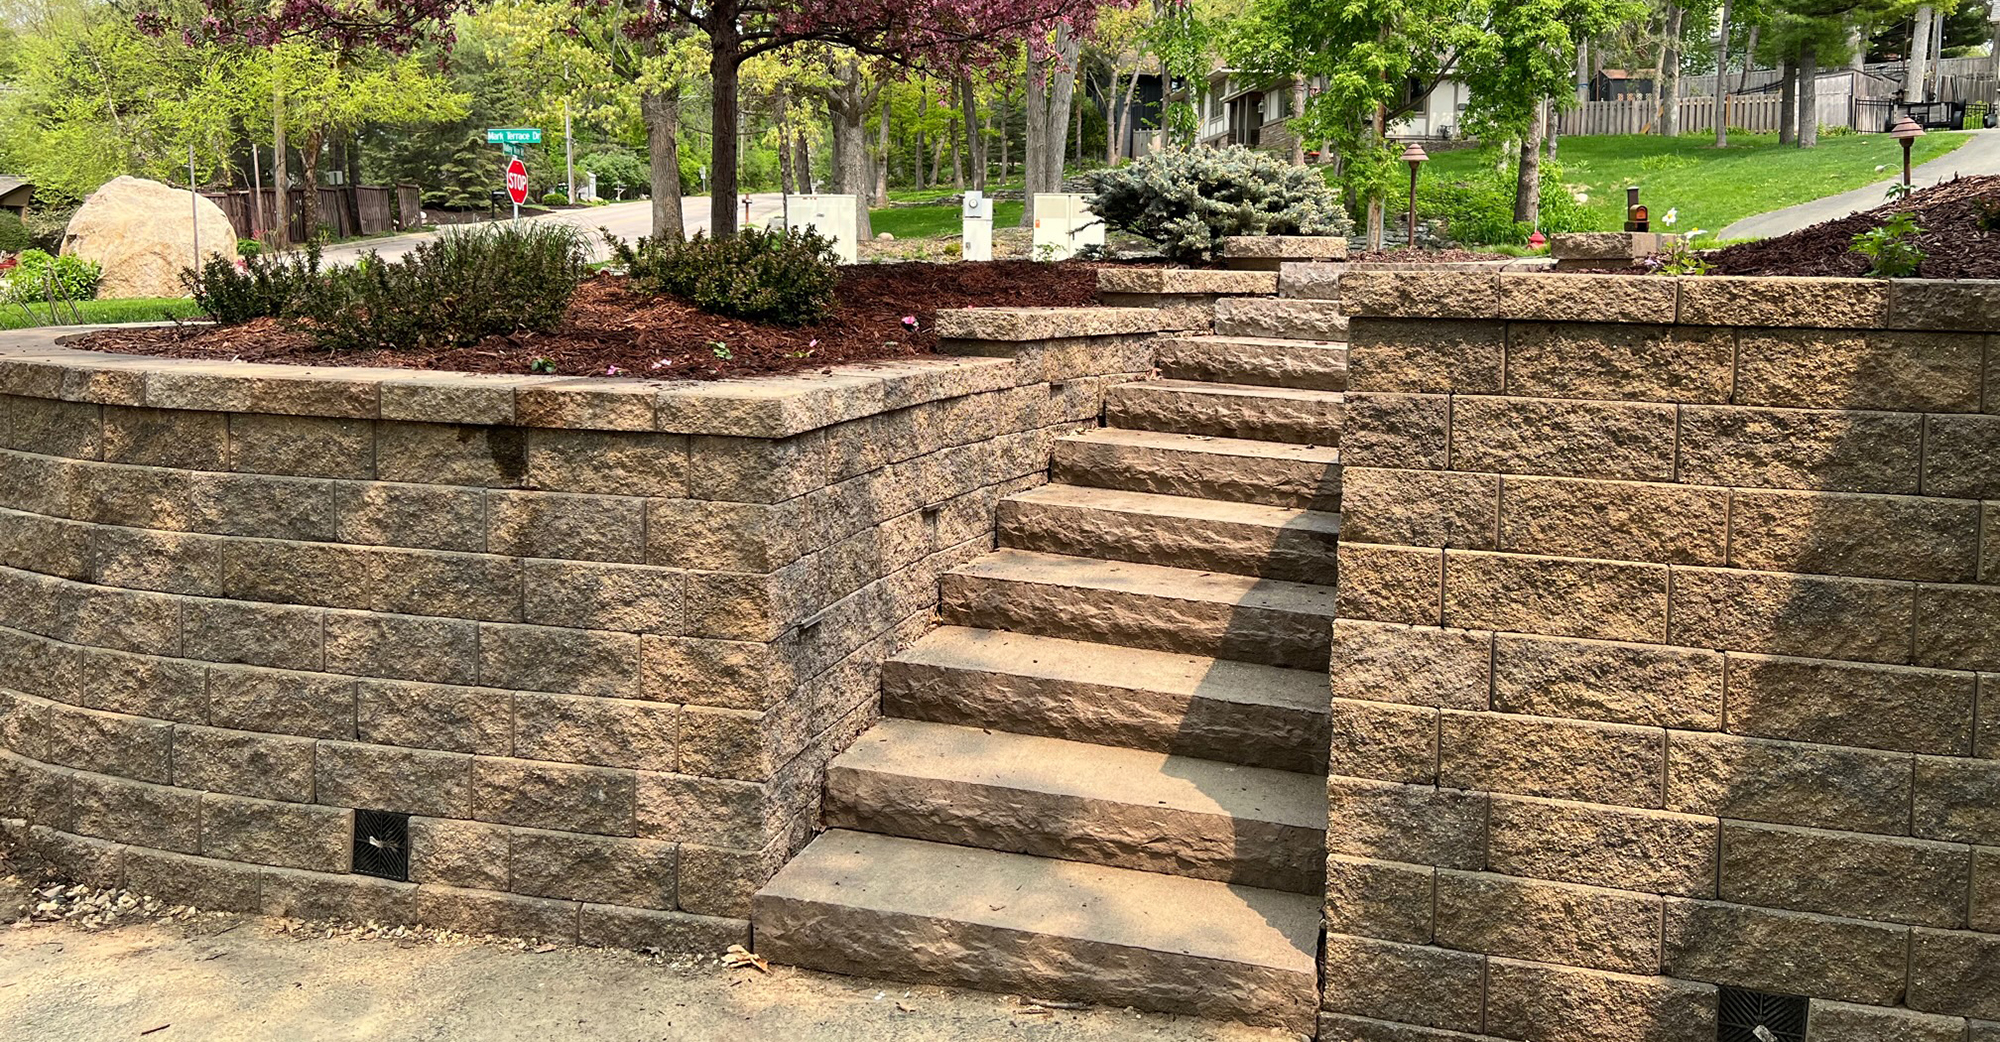 Retaining wall with paver stairs that lead up it